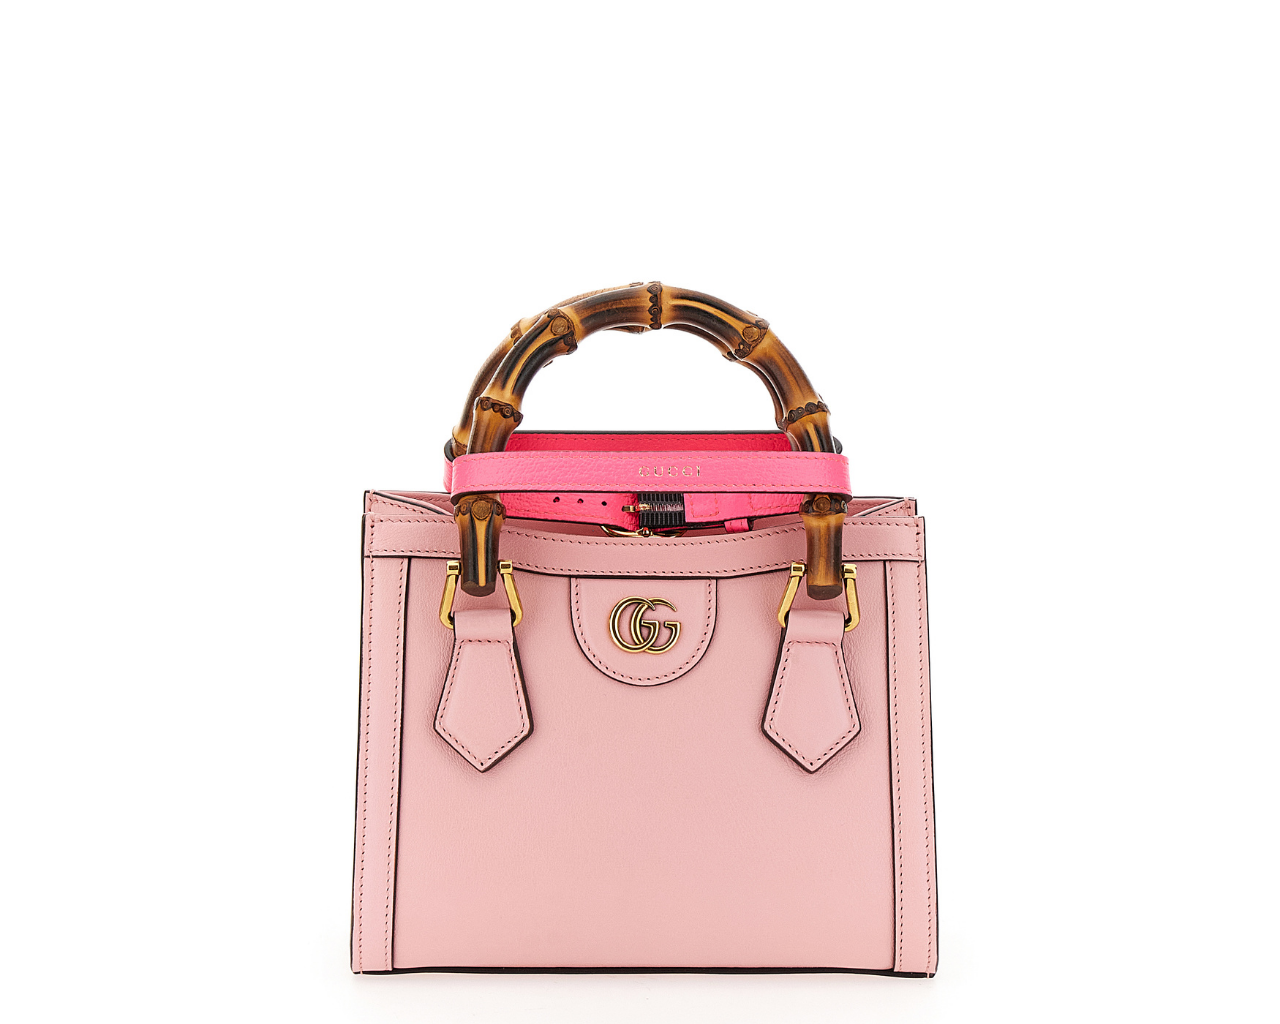 Royal Tribute: Gucci brings back Princess Diana's favorite handbag from the  '90s with removable neon-bright leather belts - Luxurylaunches